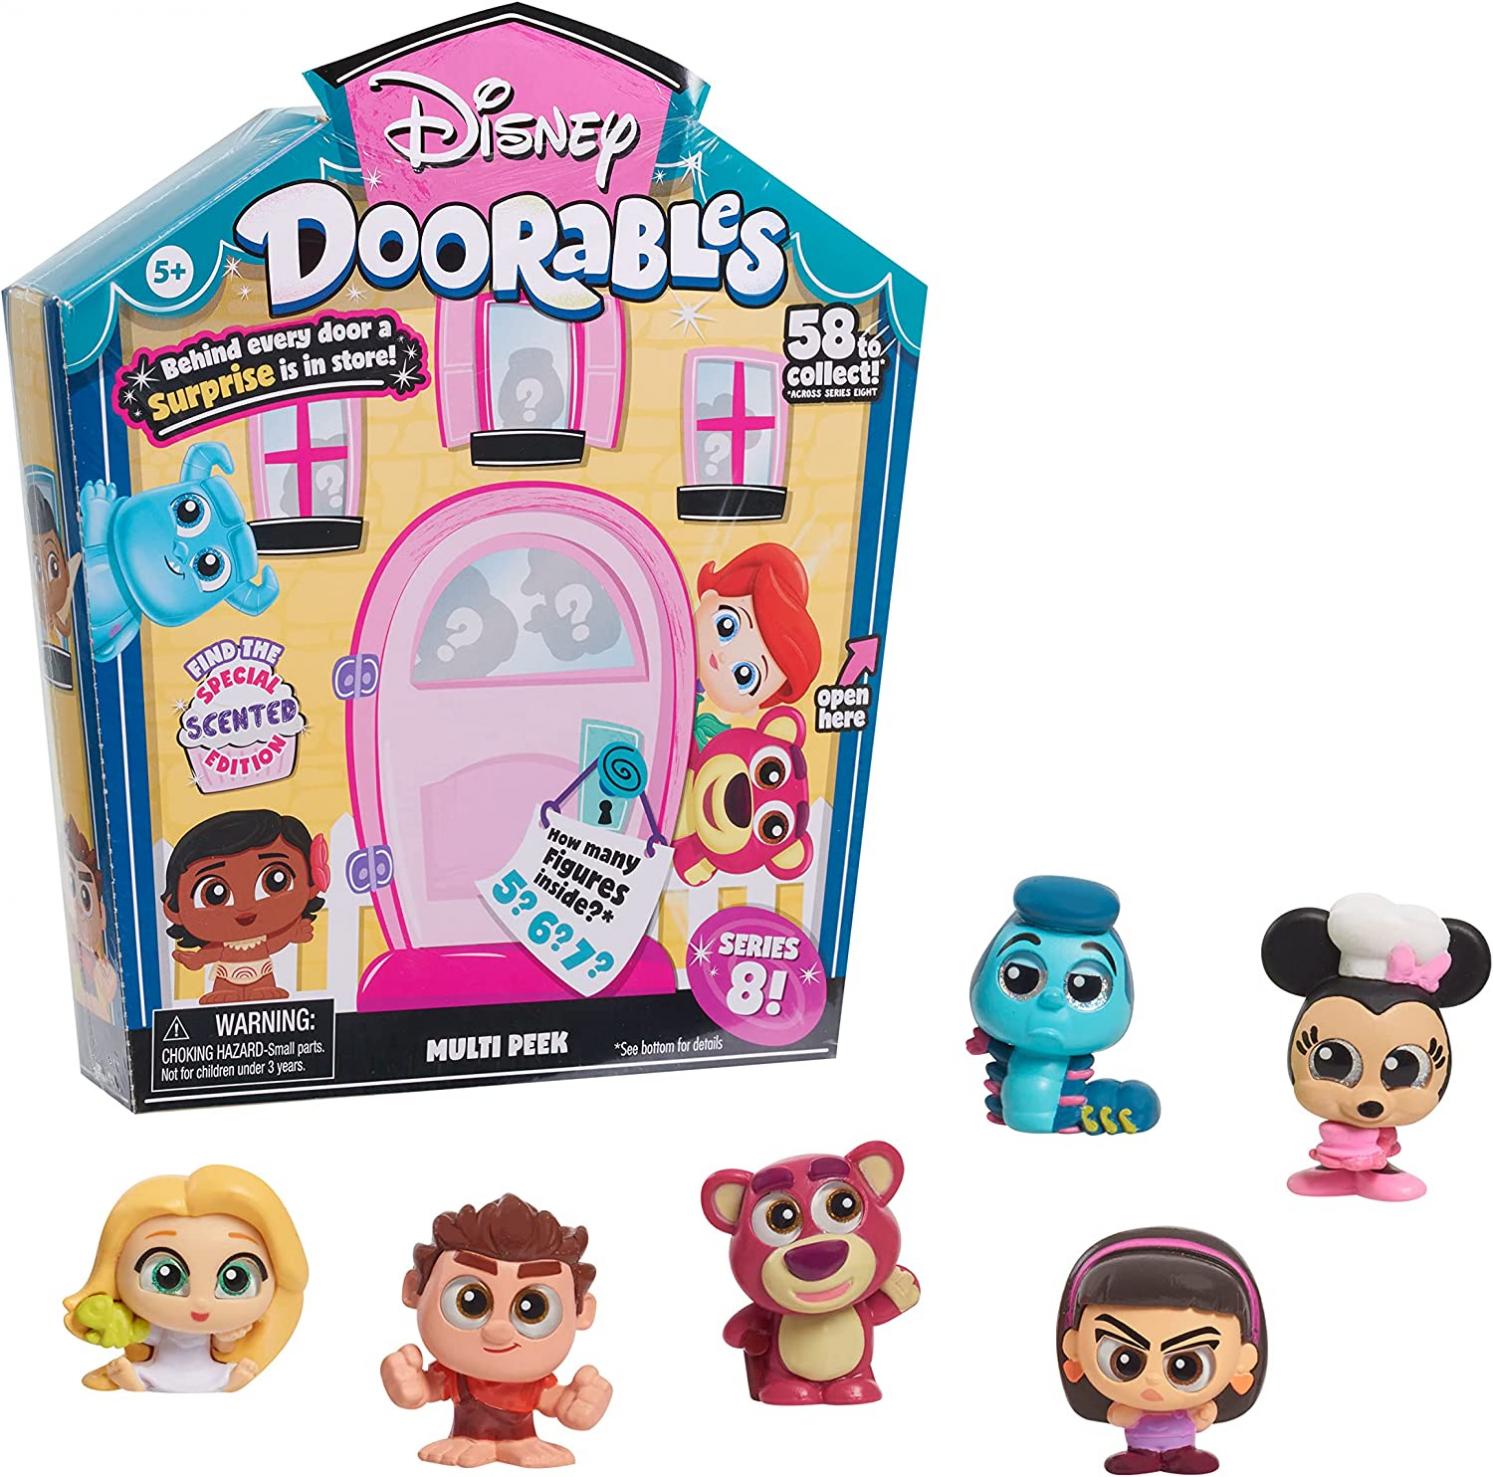 Disney Doorables Multi Peek, Easter Basket Stuffers, Series 8 Featuring Special Edition Scented Figures, Styles May Vary, Officially Licensed Kids Toys for Ages 5 Up, Gifts and Presents by Just Play